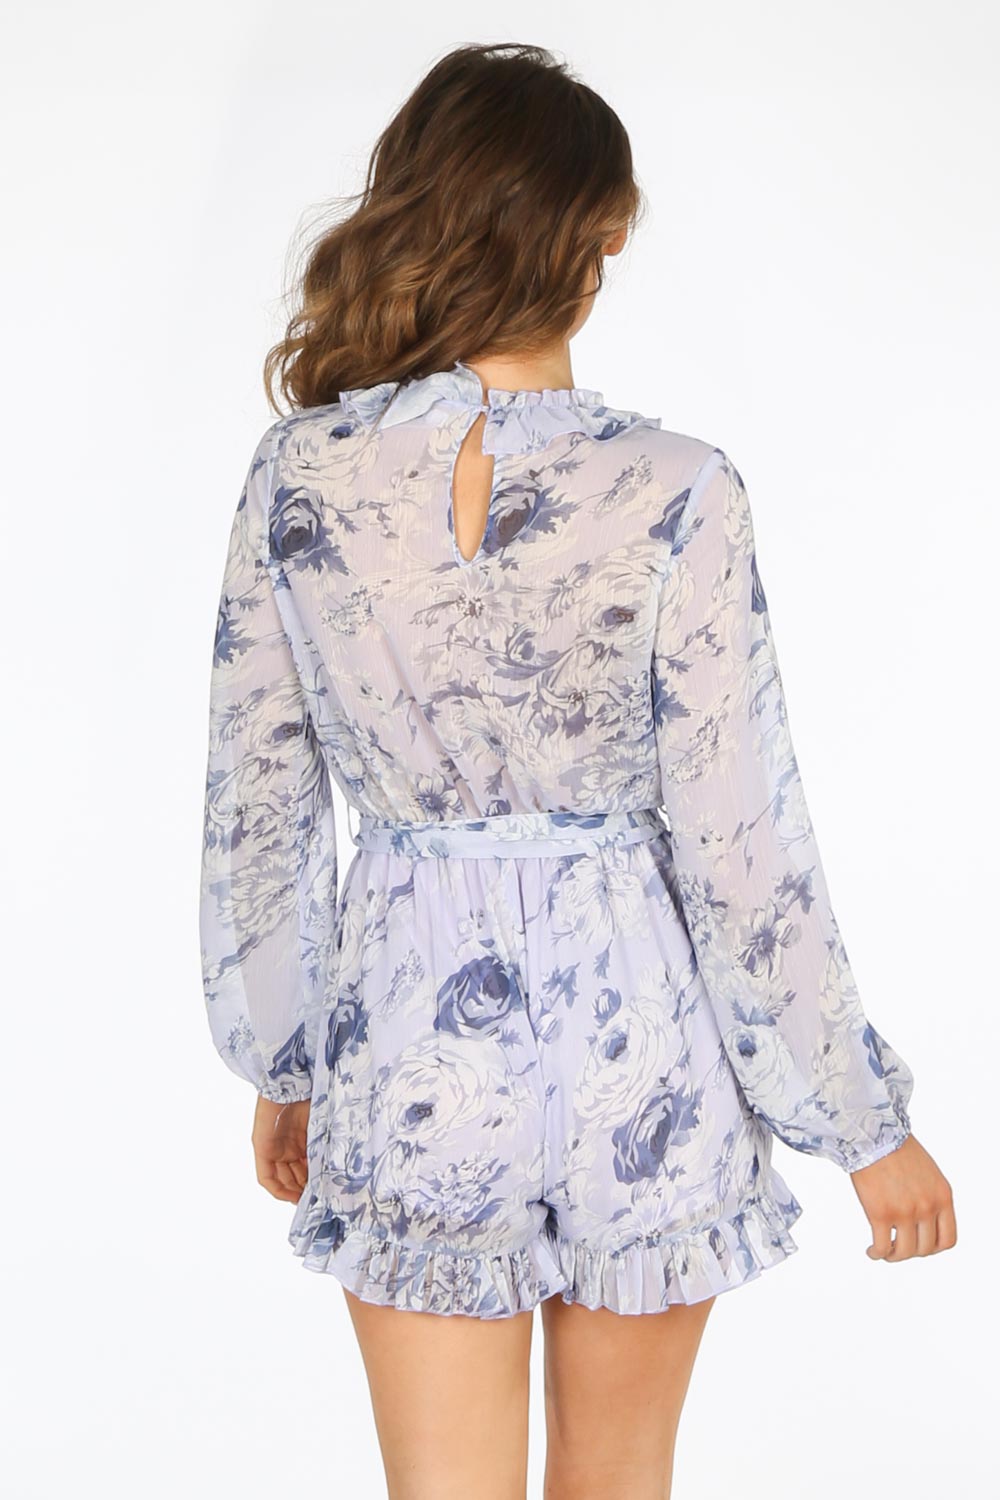 Lilac Long Sleeve Chiffon Floral Playsuit